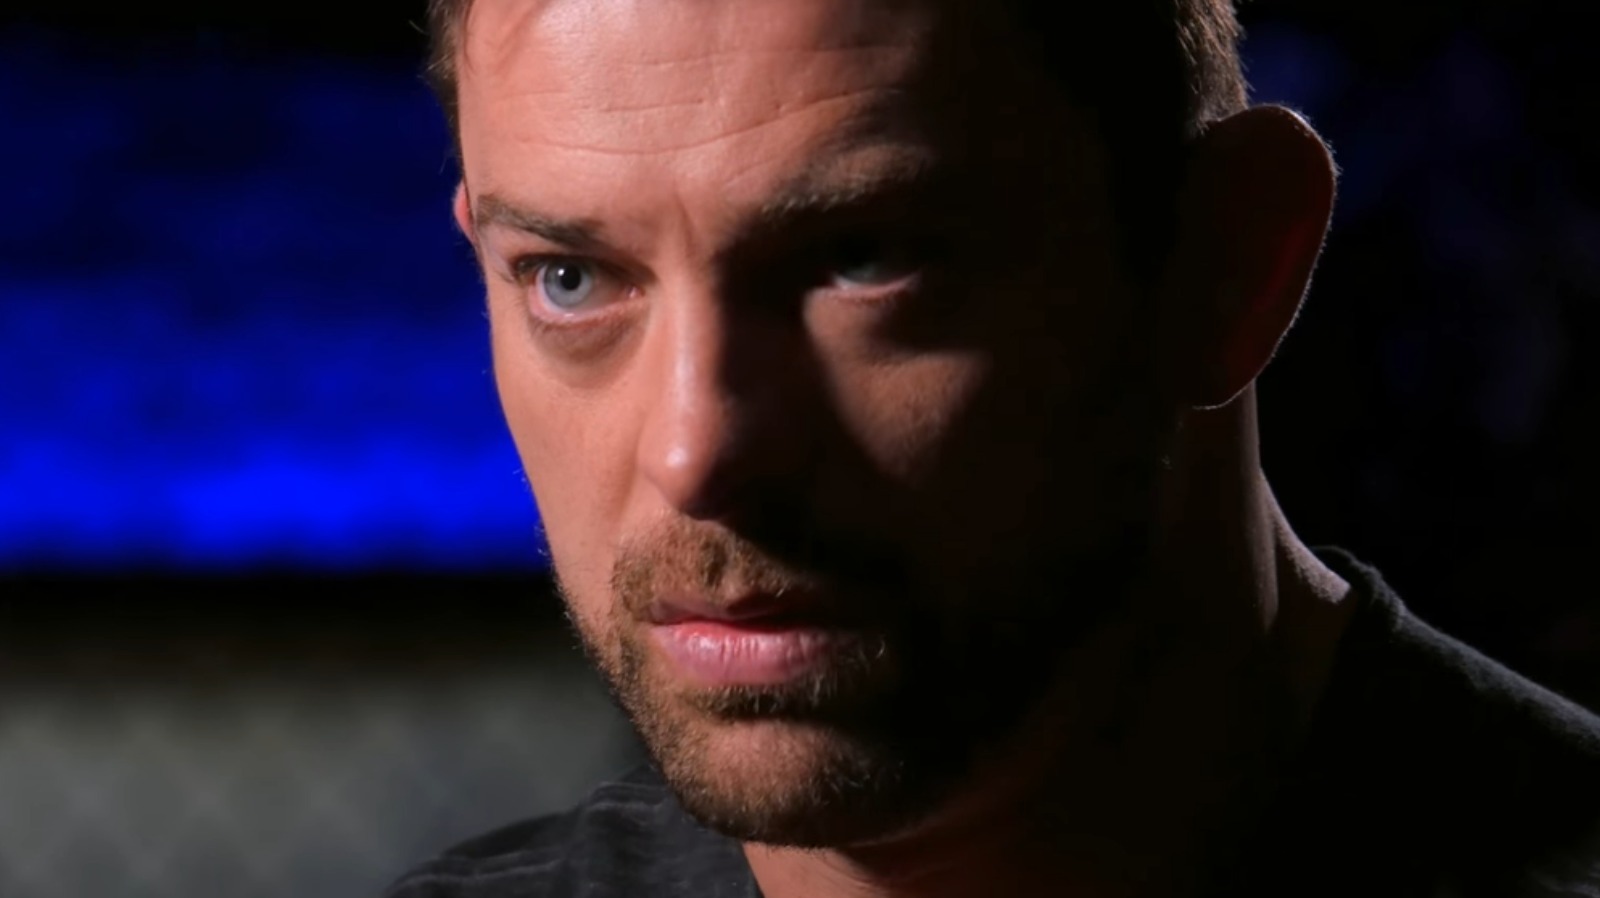 15 Facts About Davey Richards - Facts.net